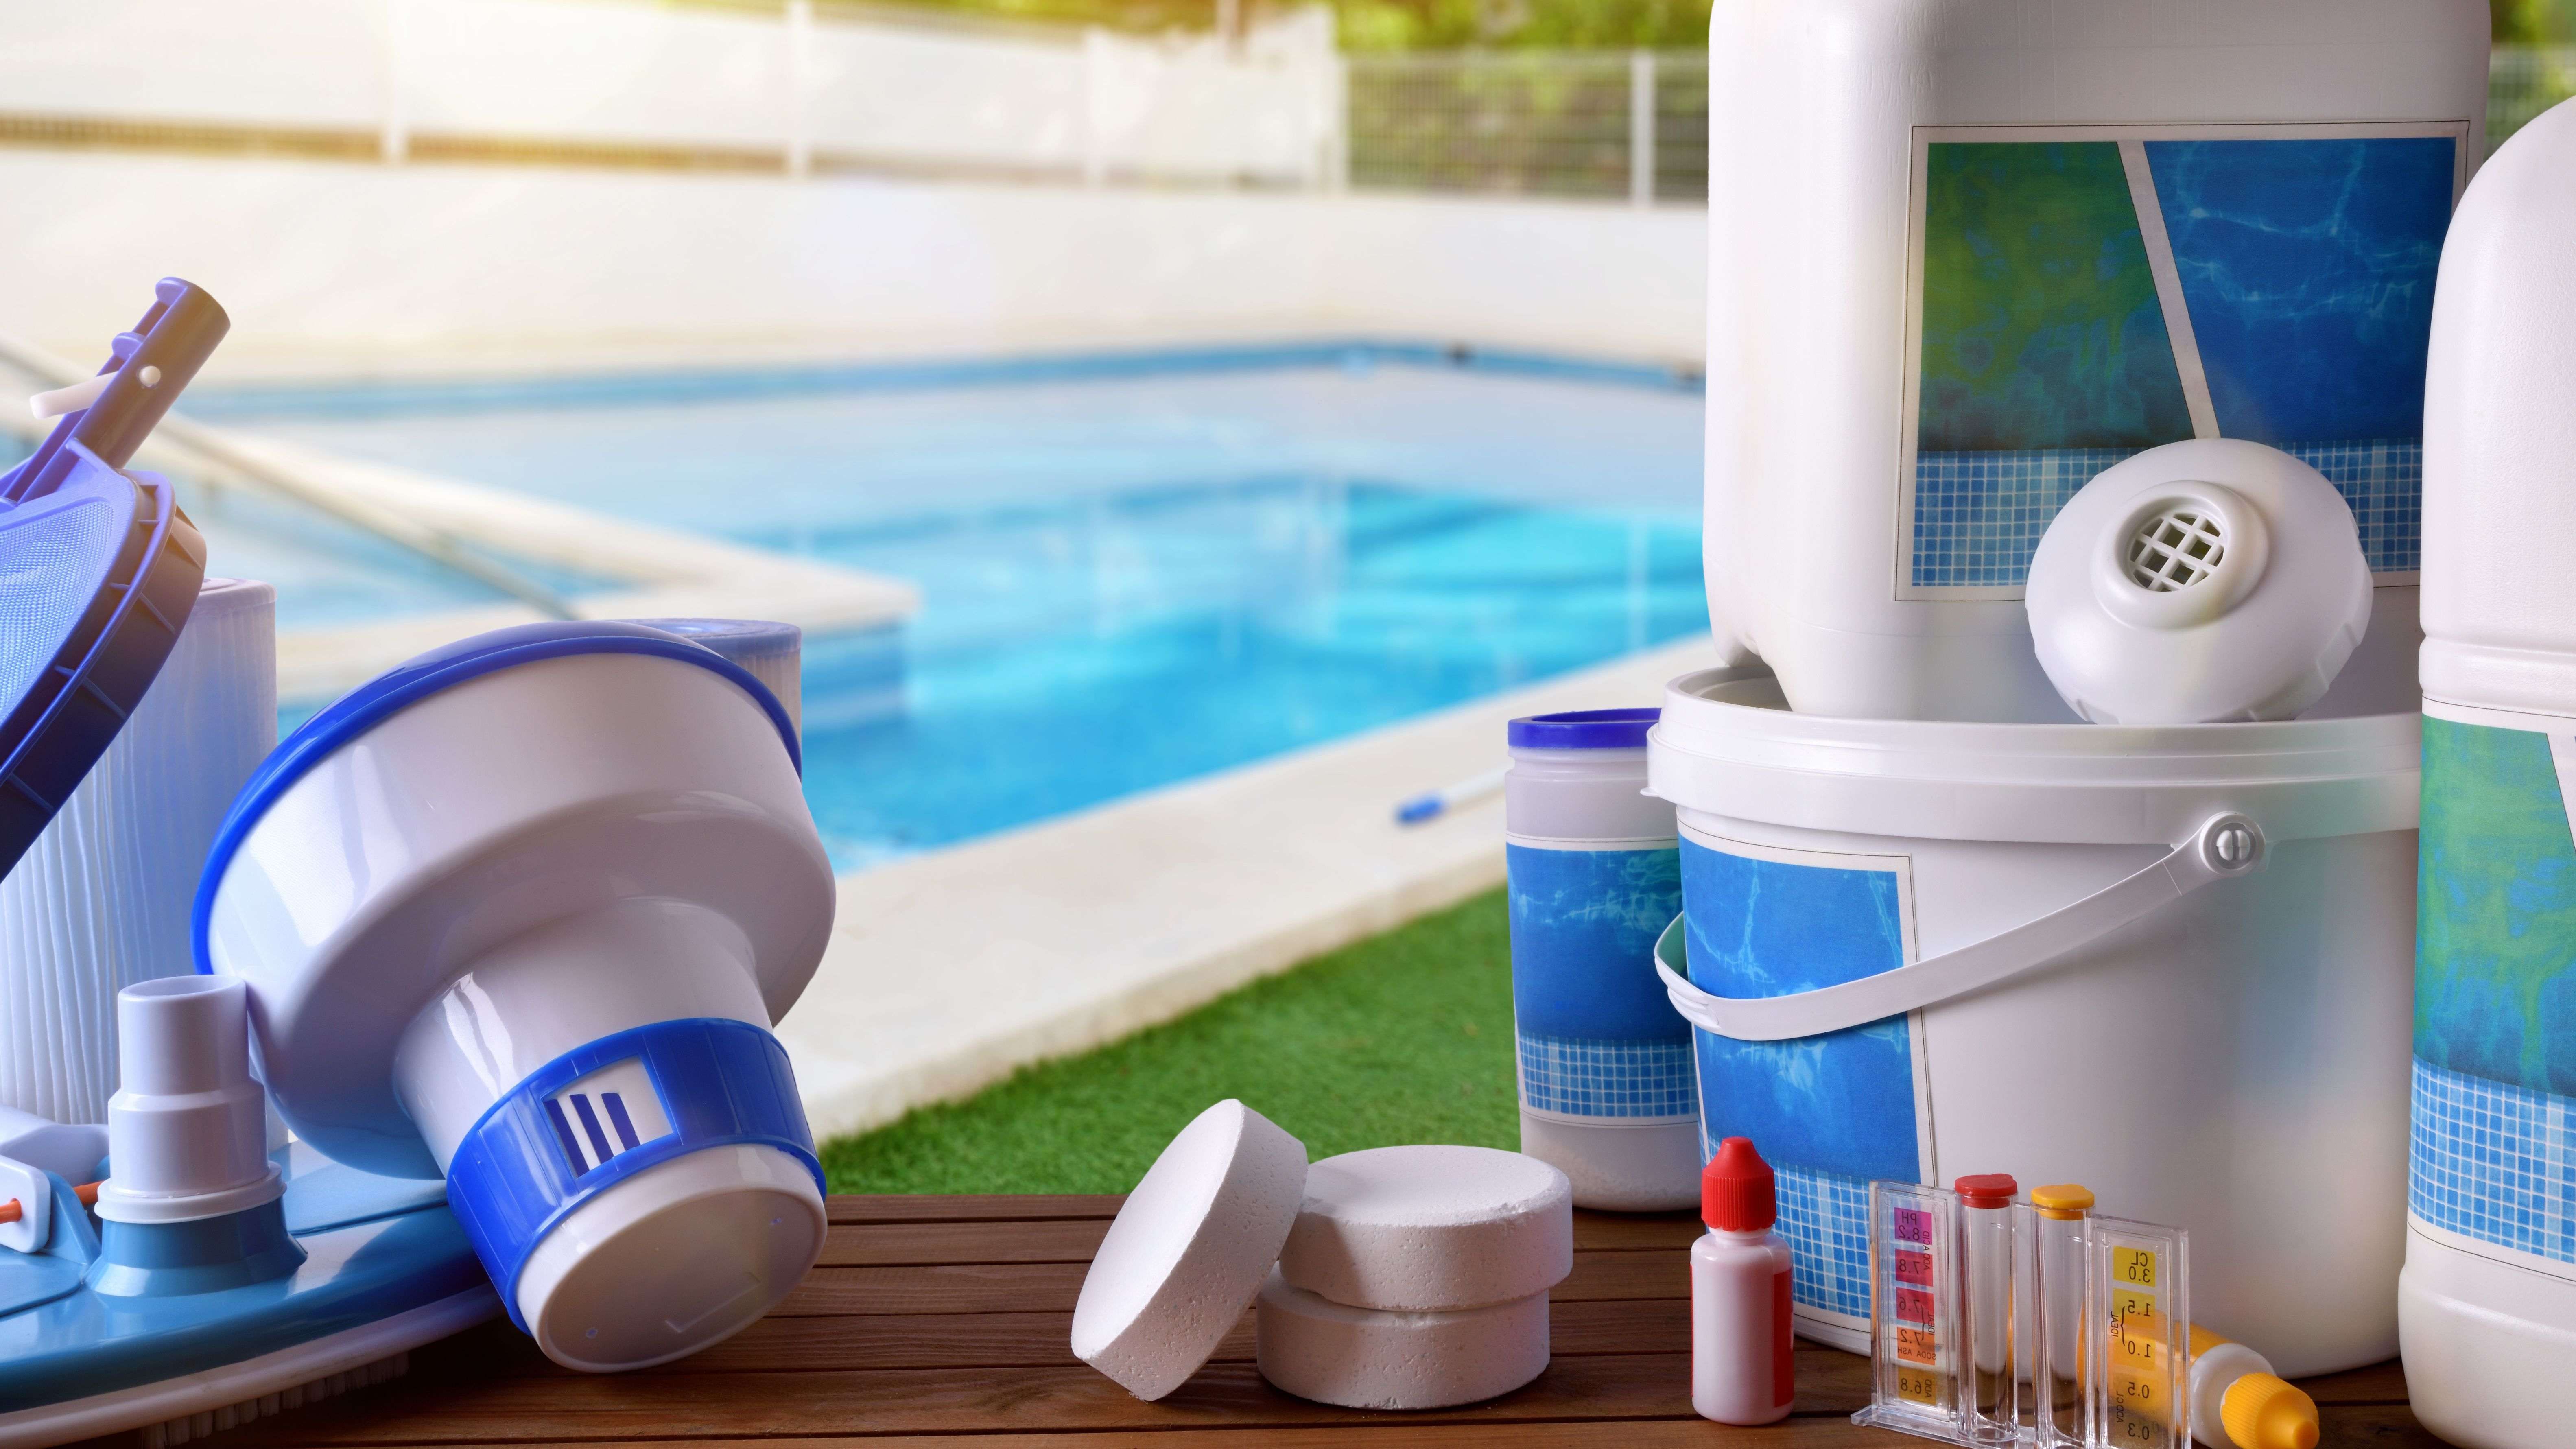 Pool maintenance products buying guide